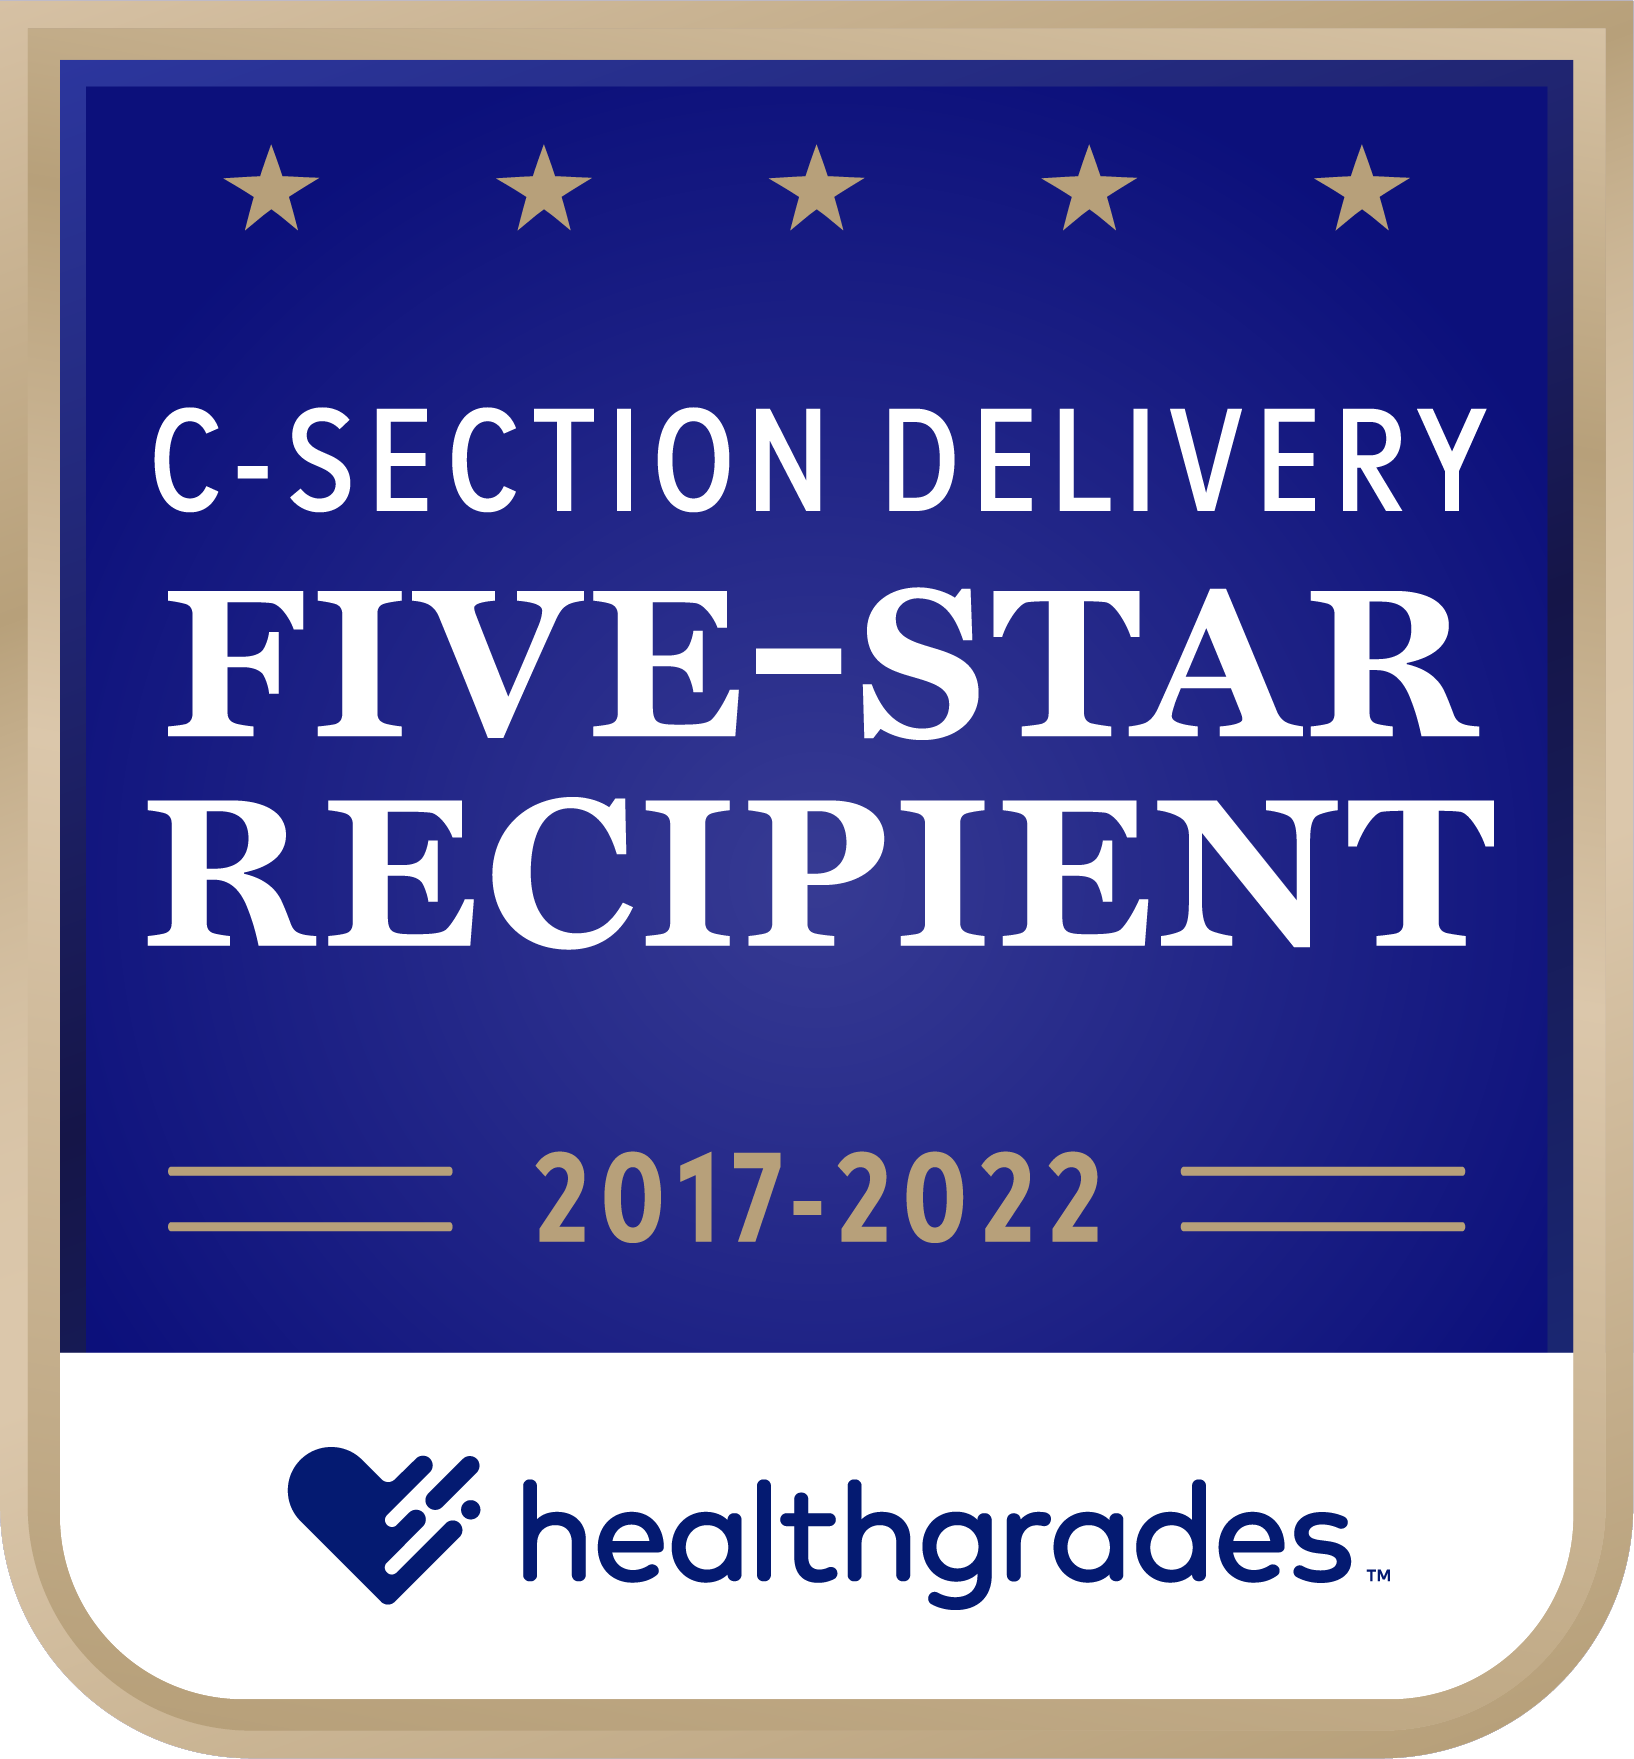 Five-Star Recipient for C-Section Delivery for 6 Years in a Row (2017-2022)